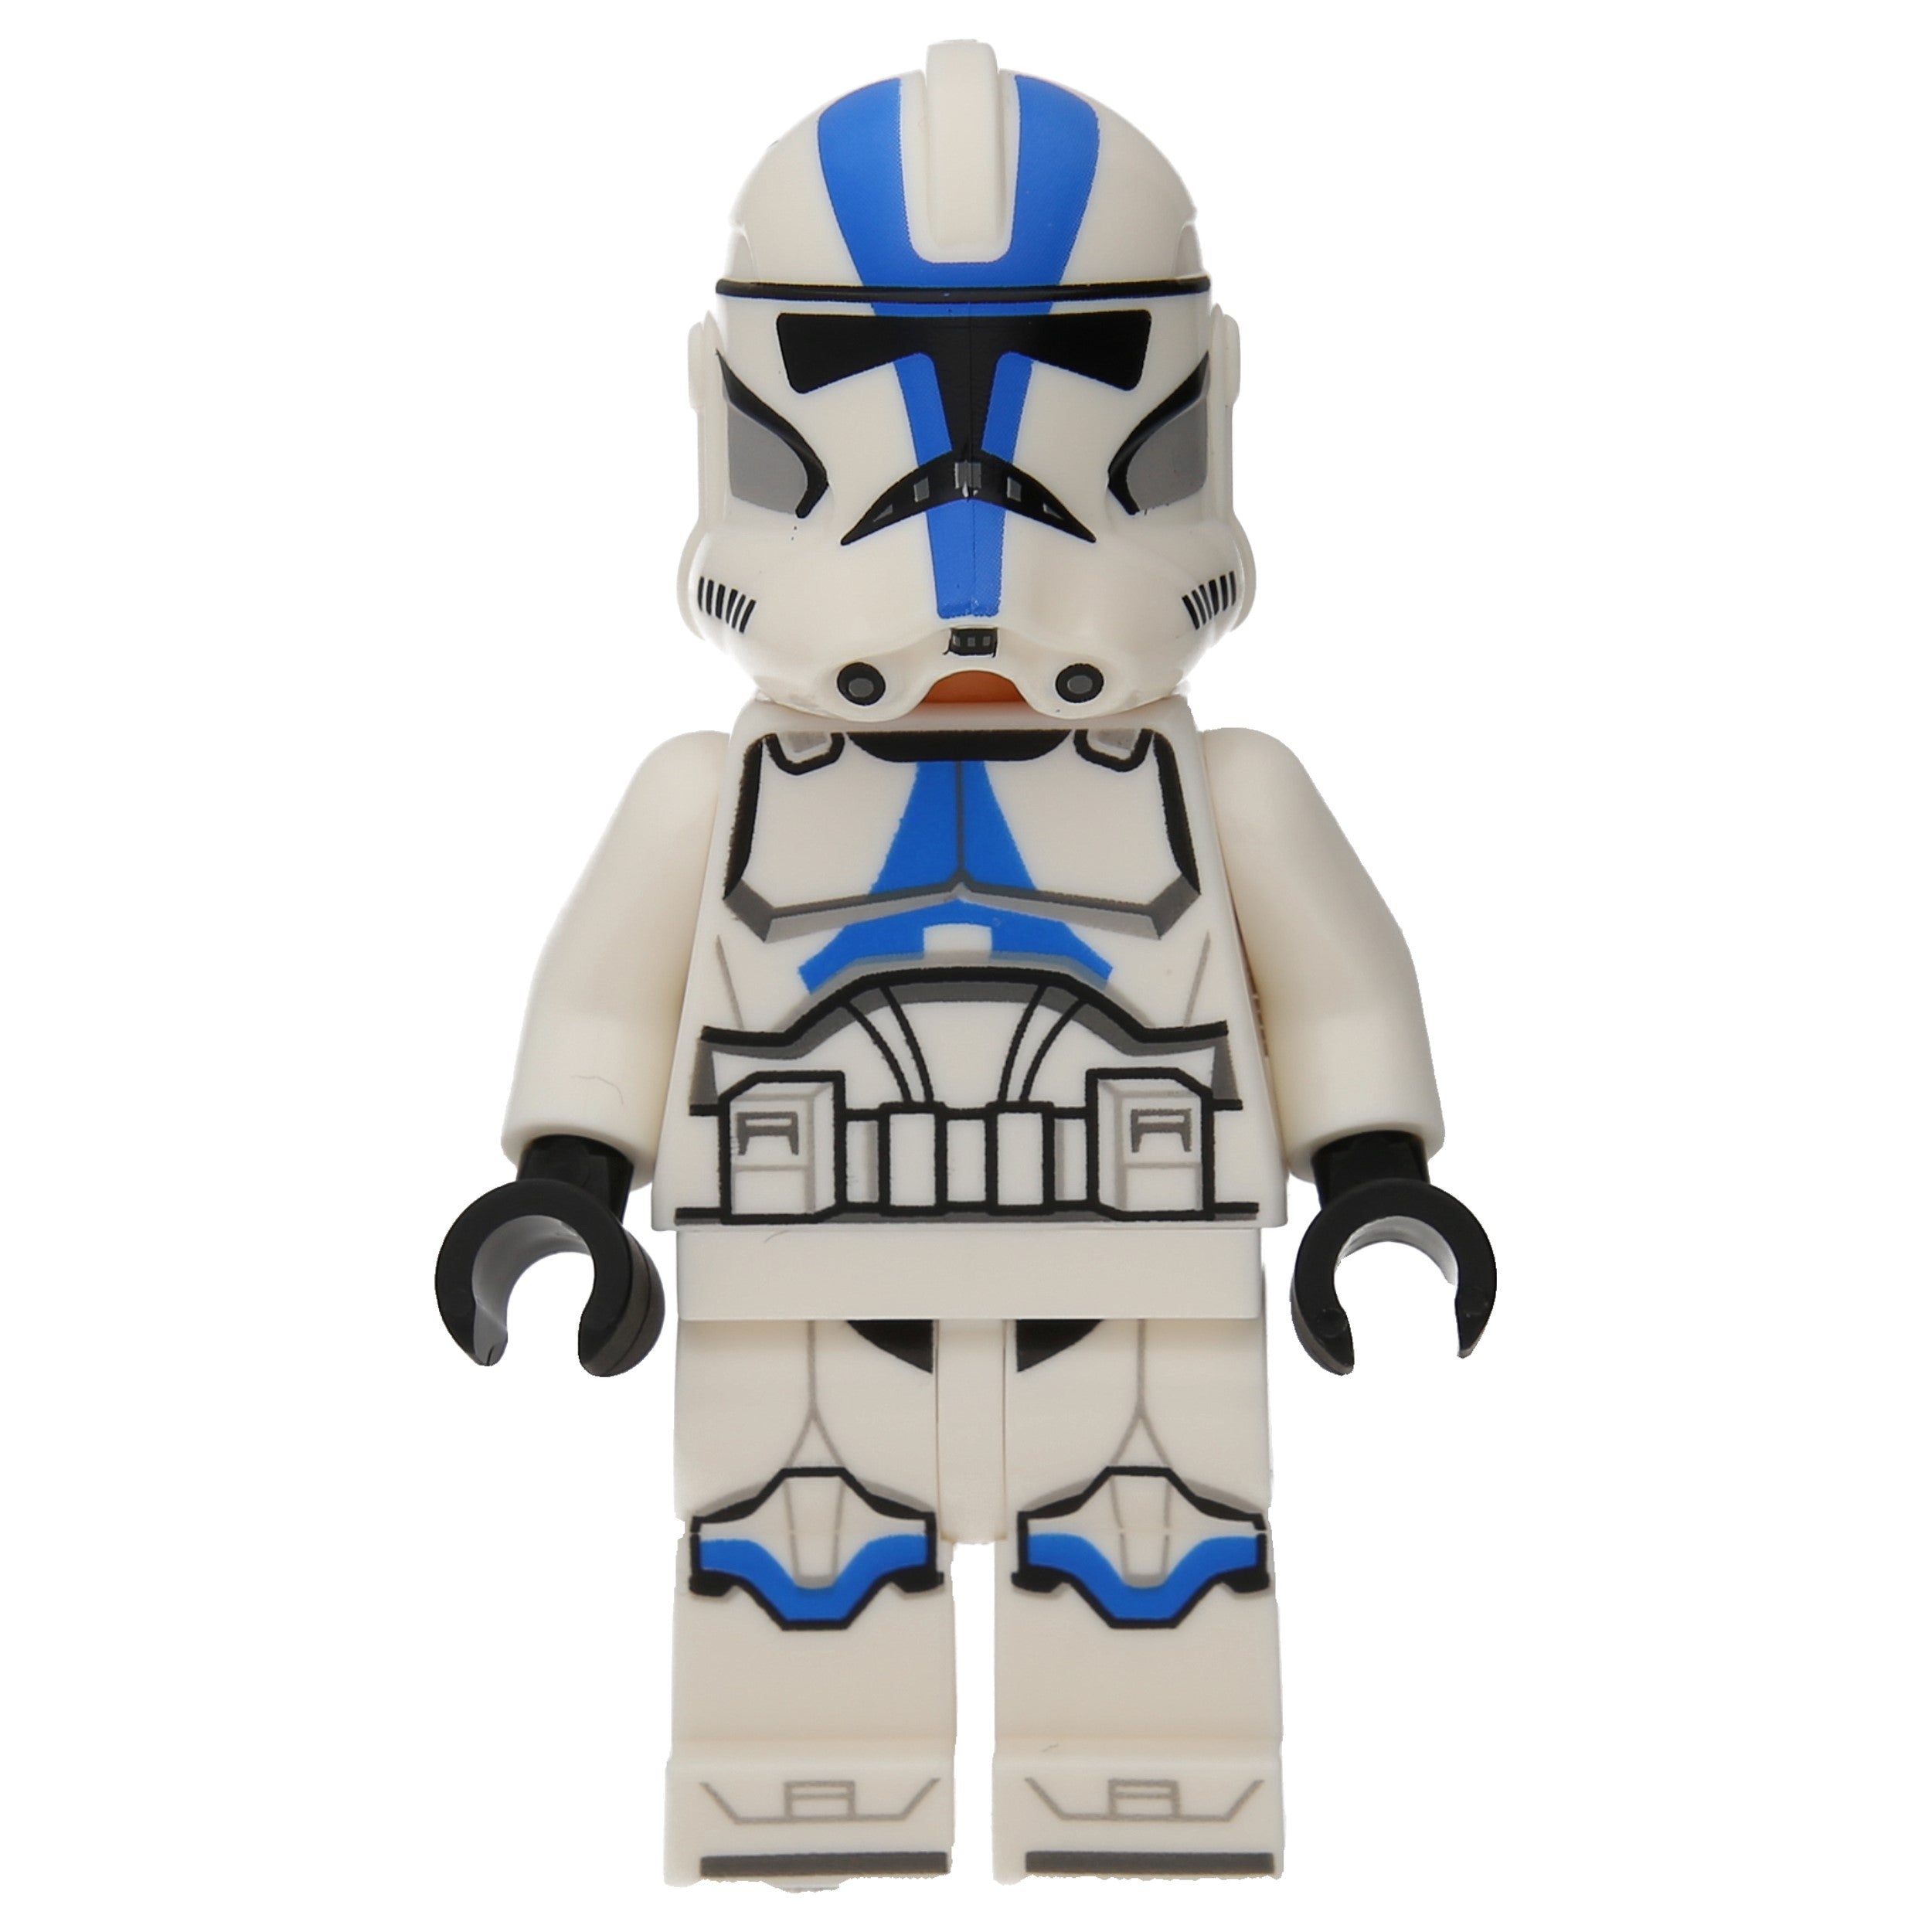 LEGO Star Wars Minifigure - Clone Troopers of the 501st Legion